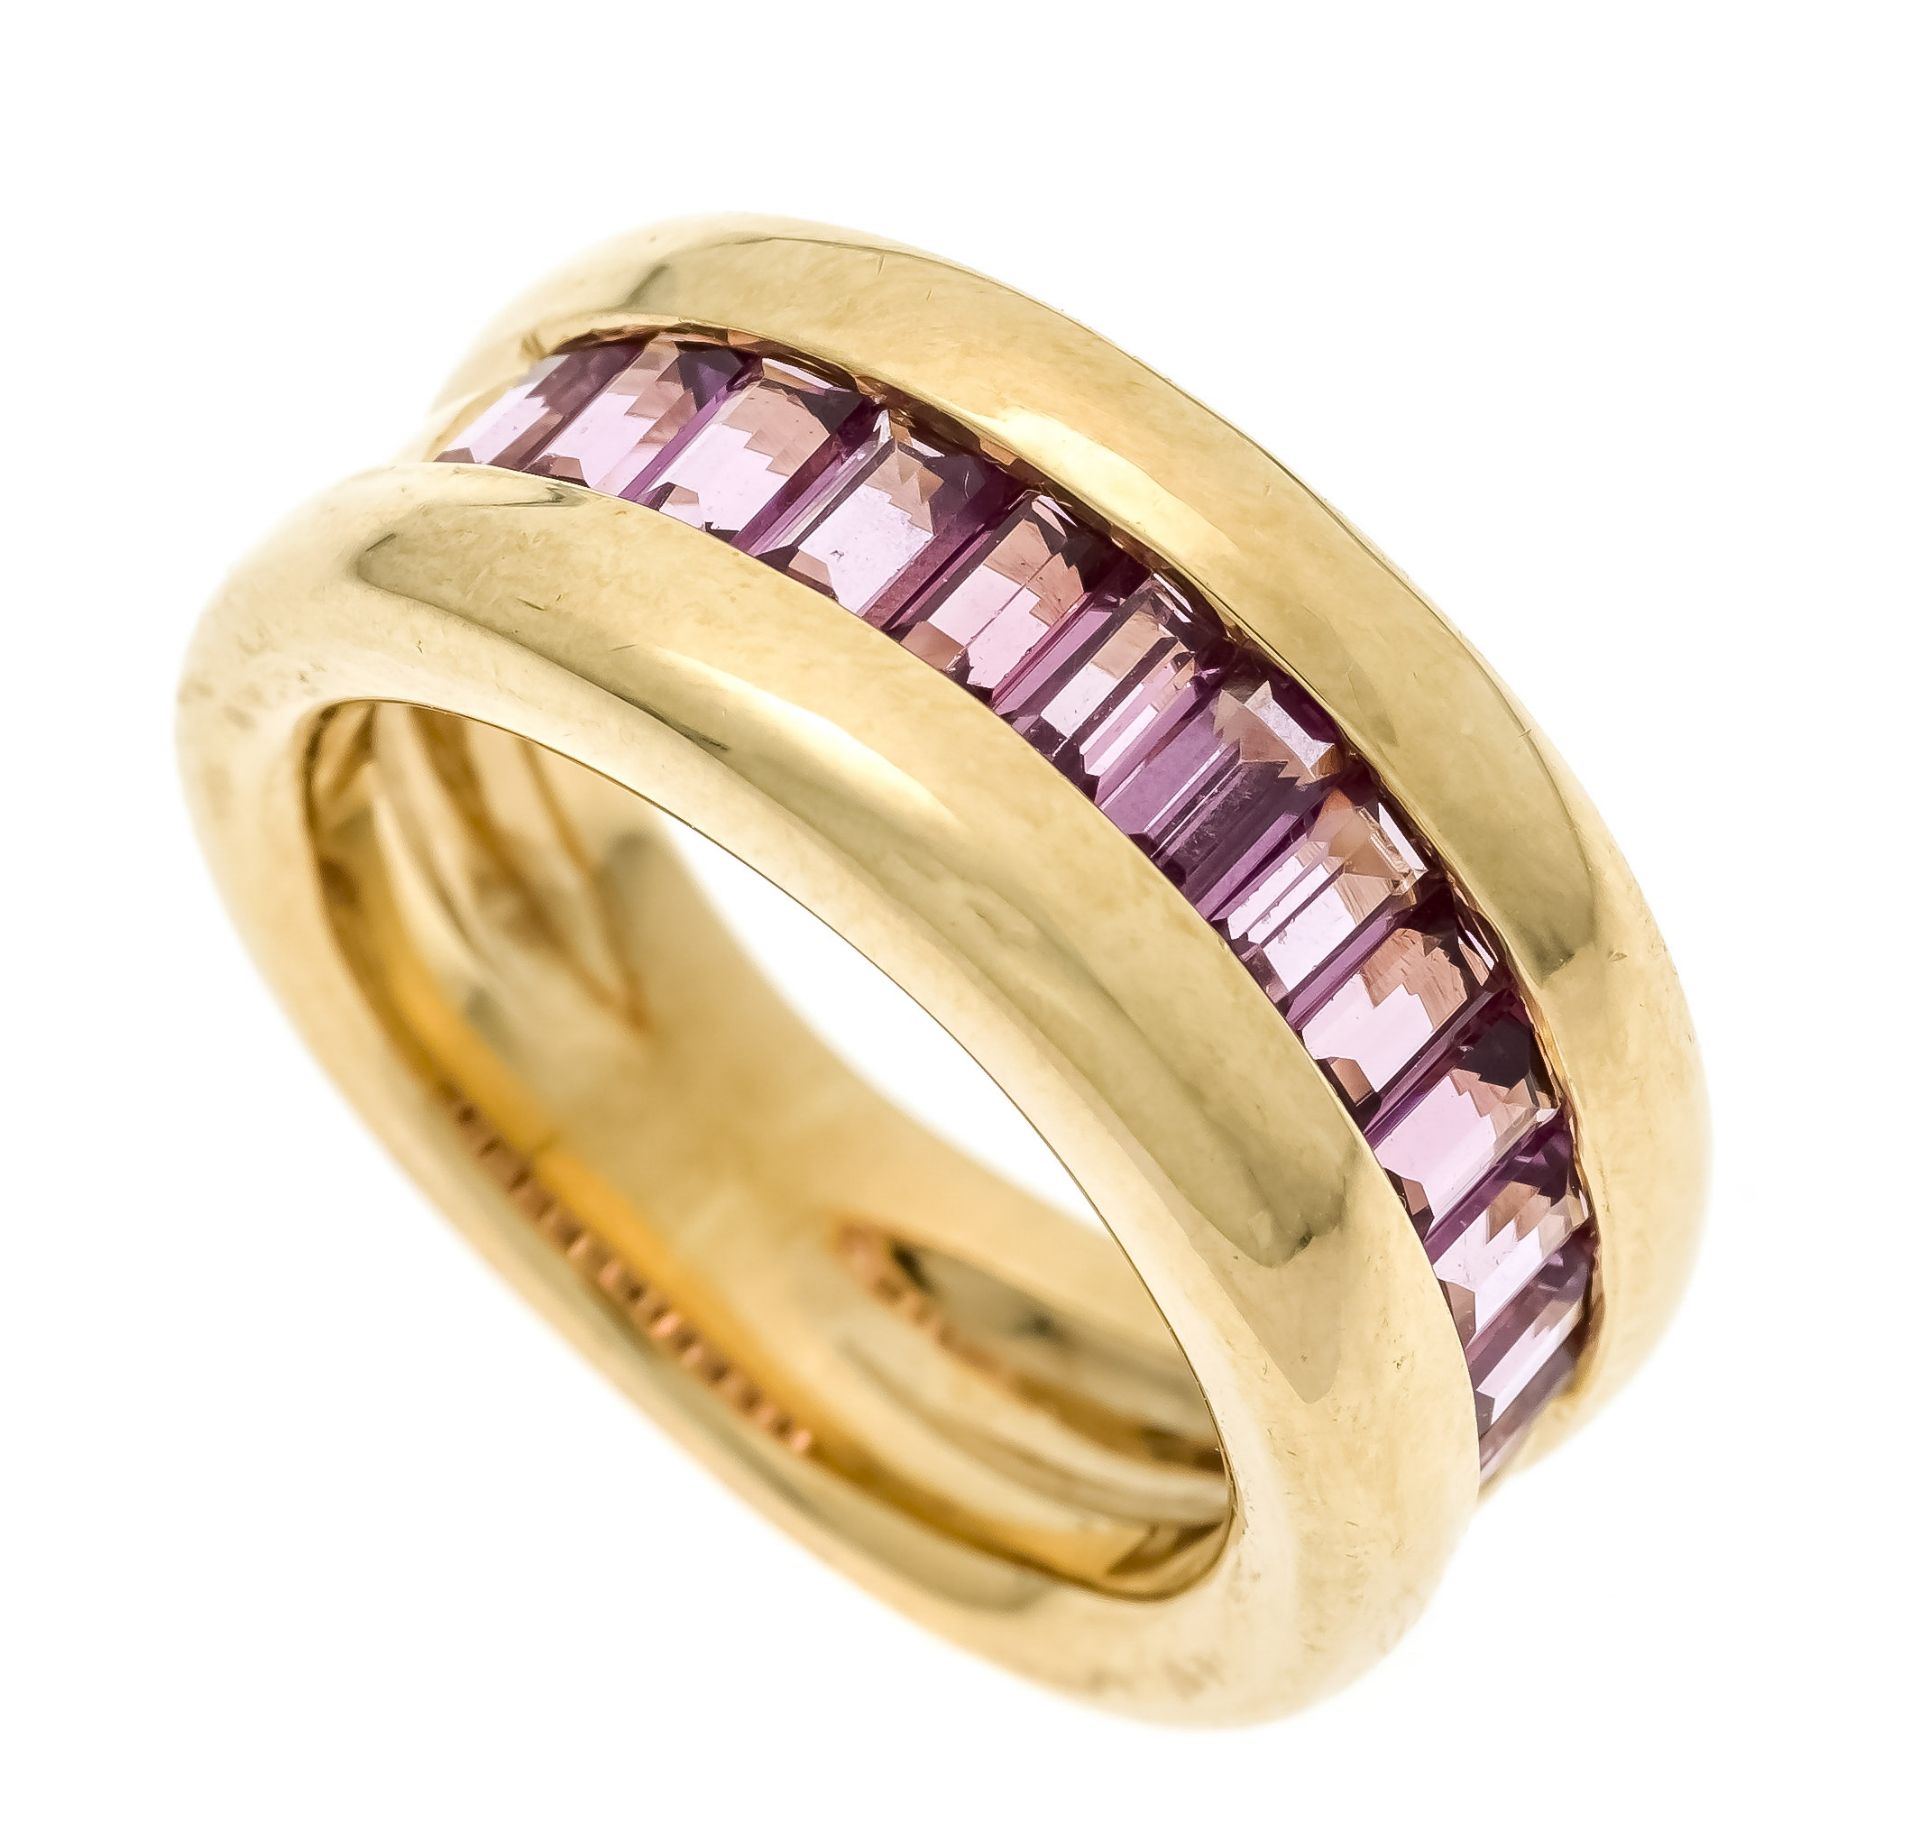 Tourmaline ring GG 750/000 with 13 faceted tourmaline baguettes 3.0 x 2.3 mm in brownish pink, RG